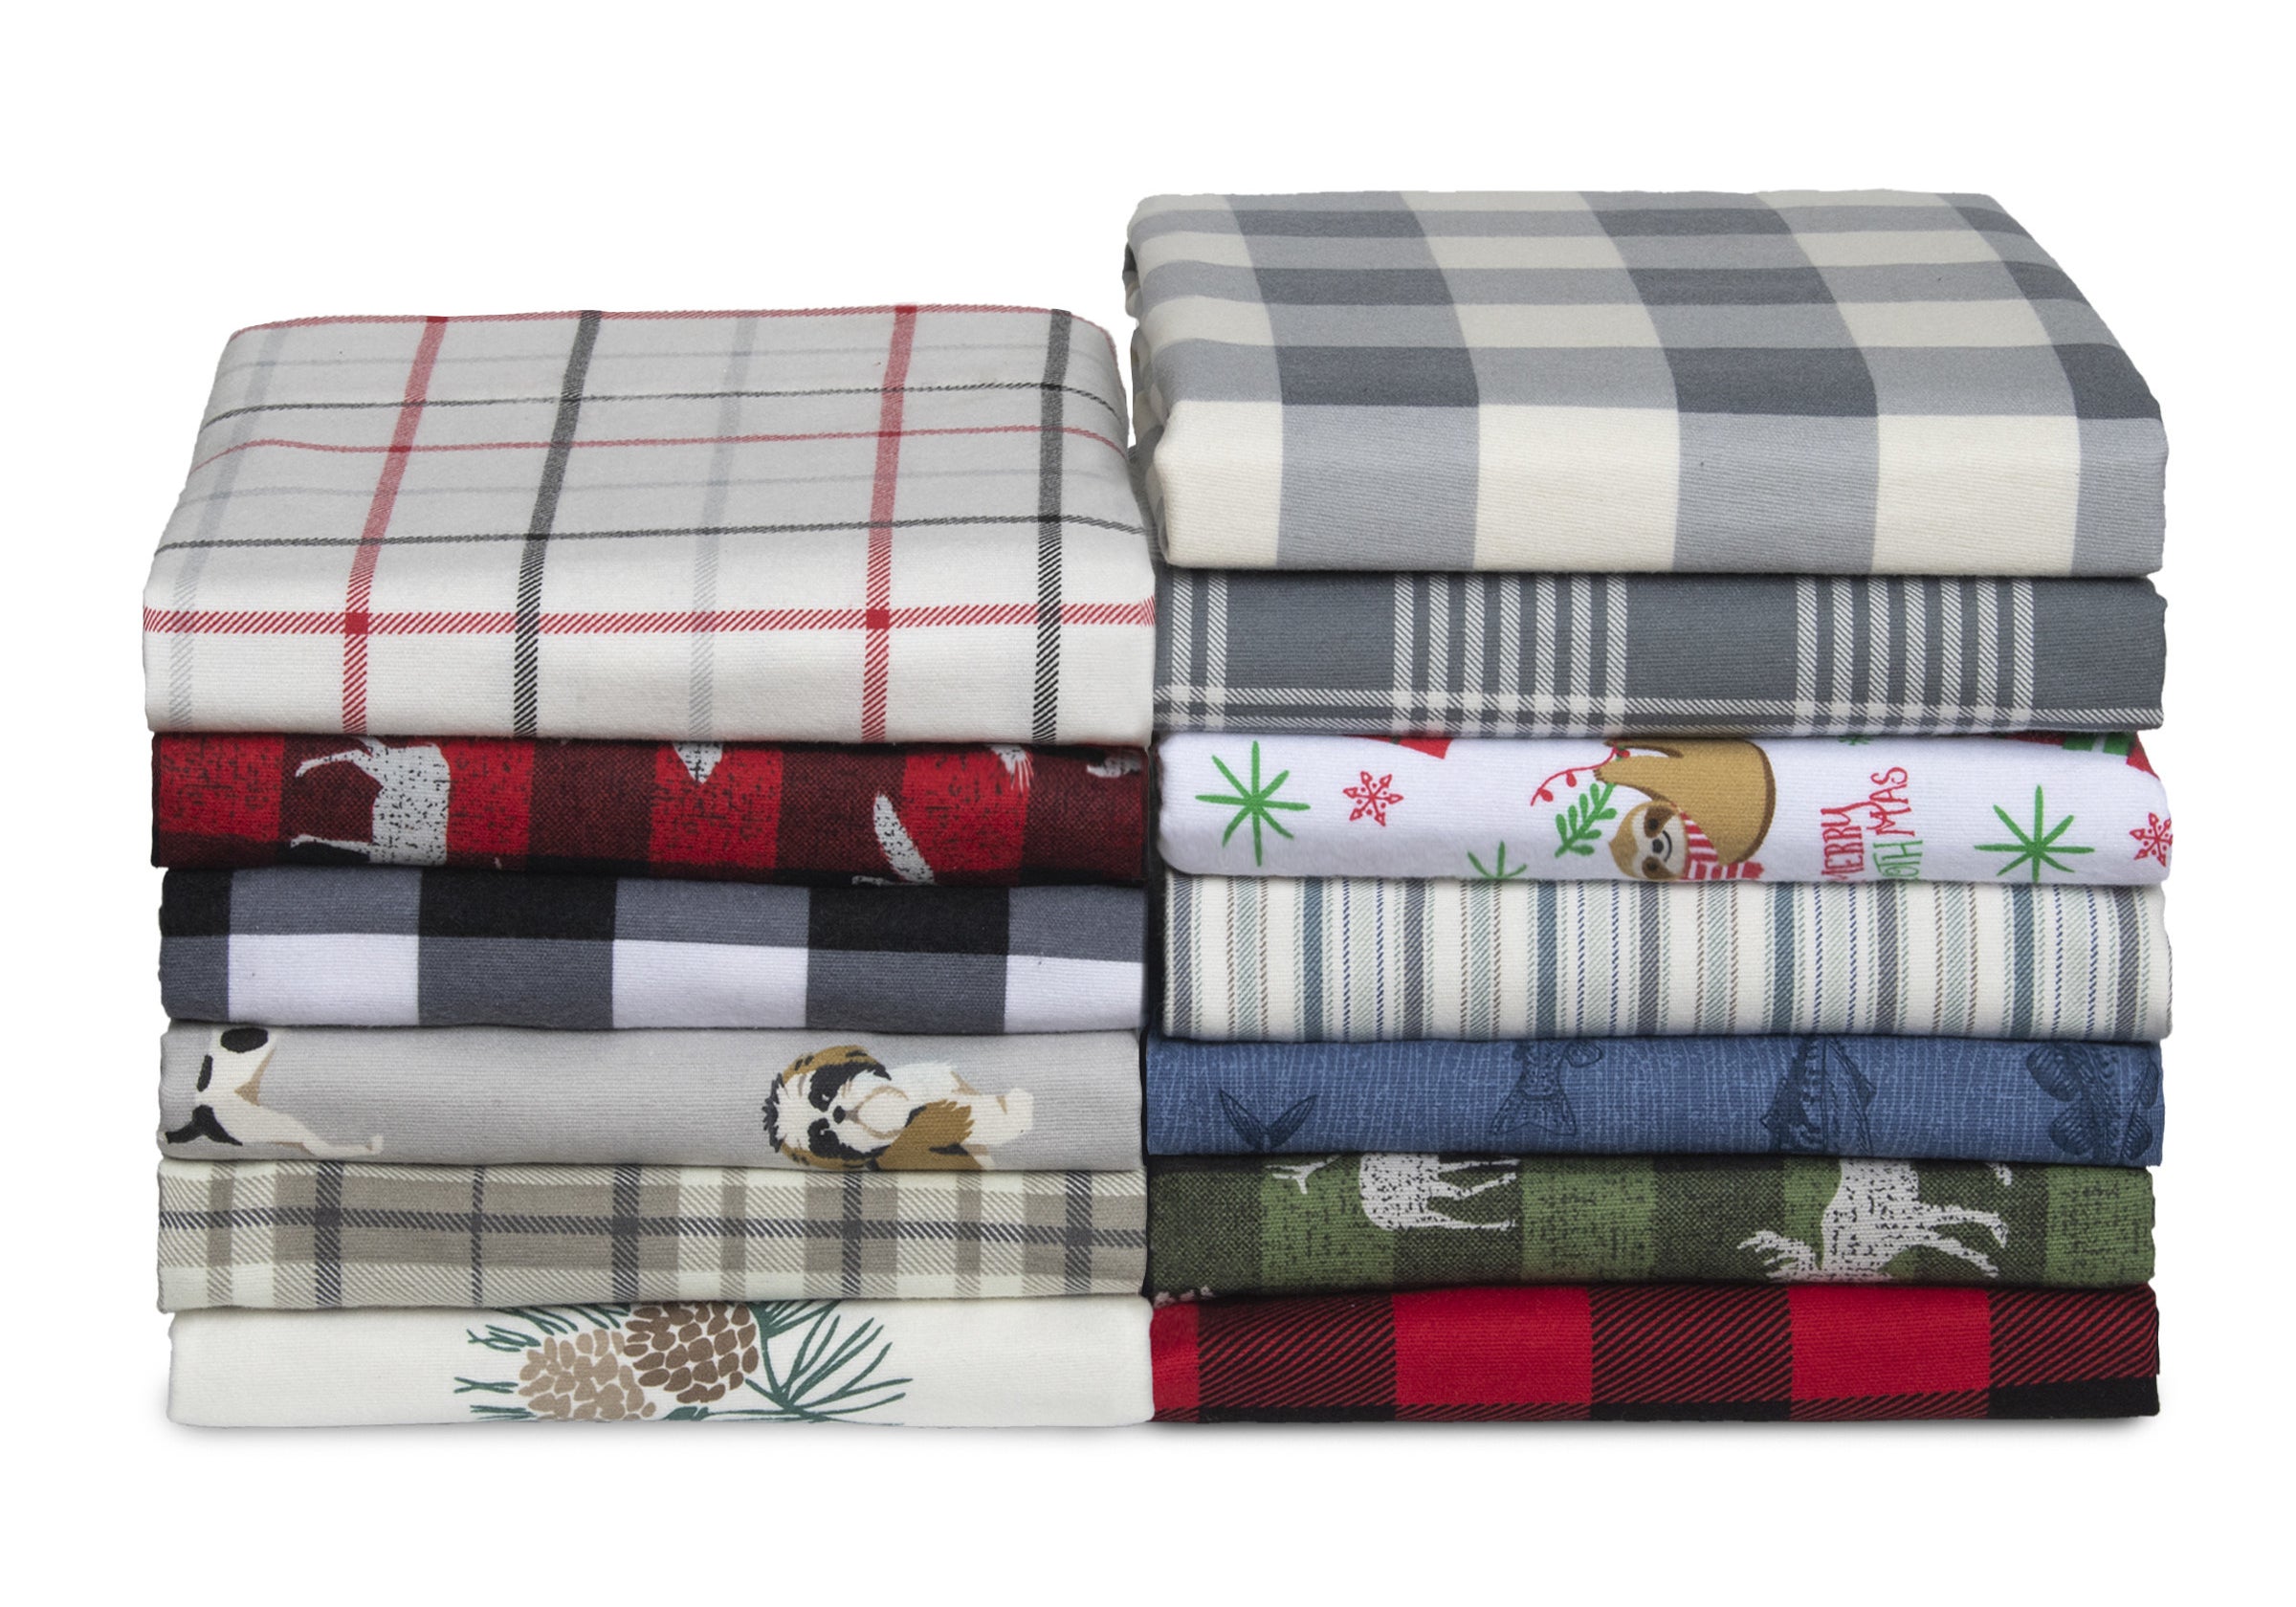 two stacks of sheets in various colors and prints such as moose and dogs 